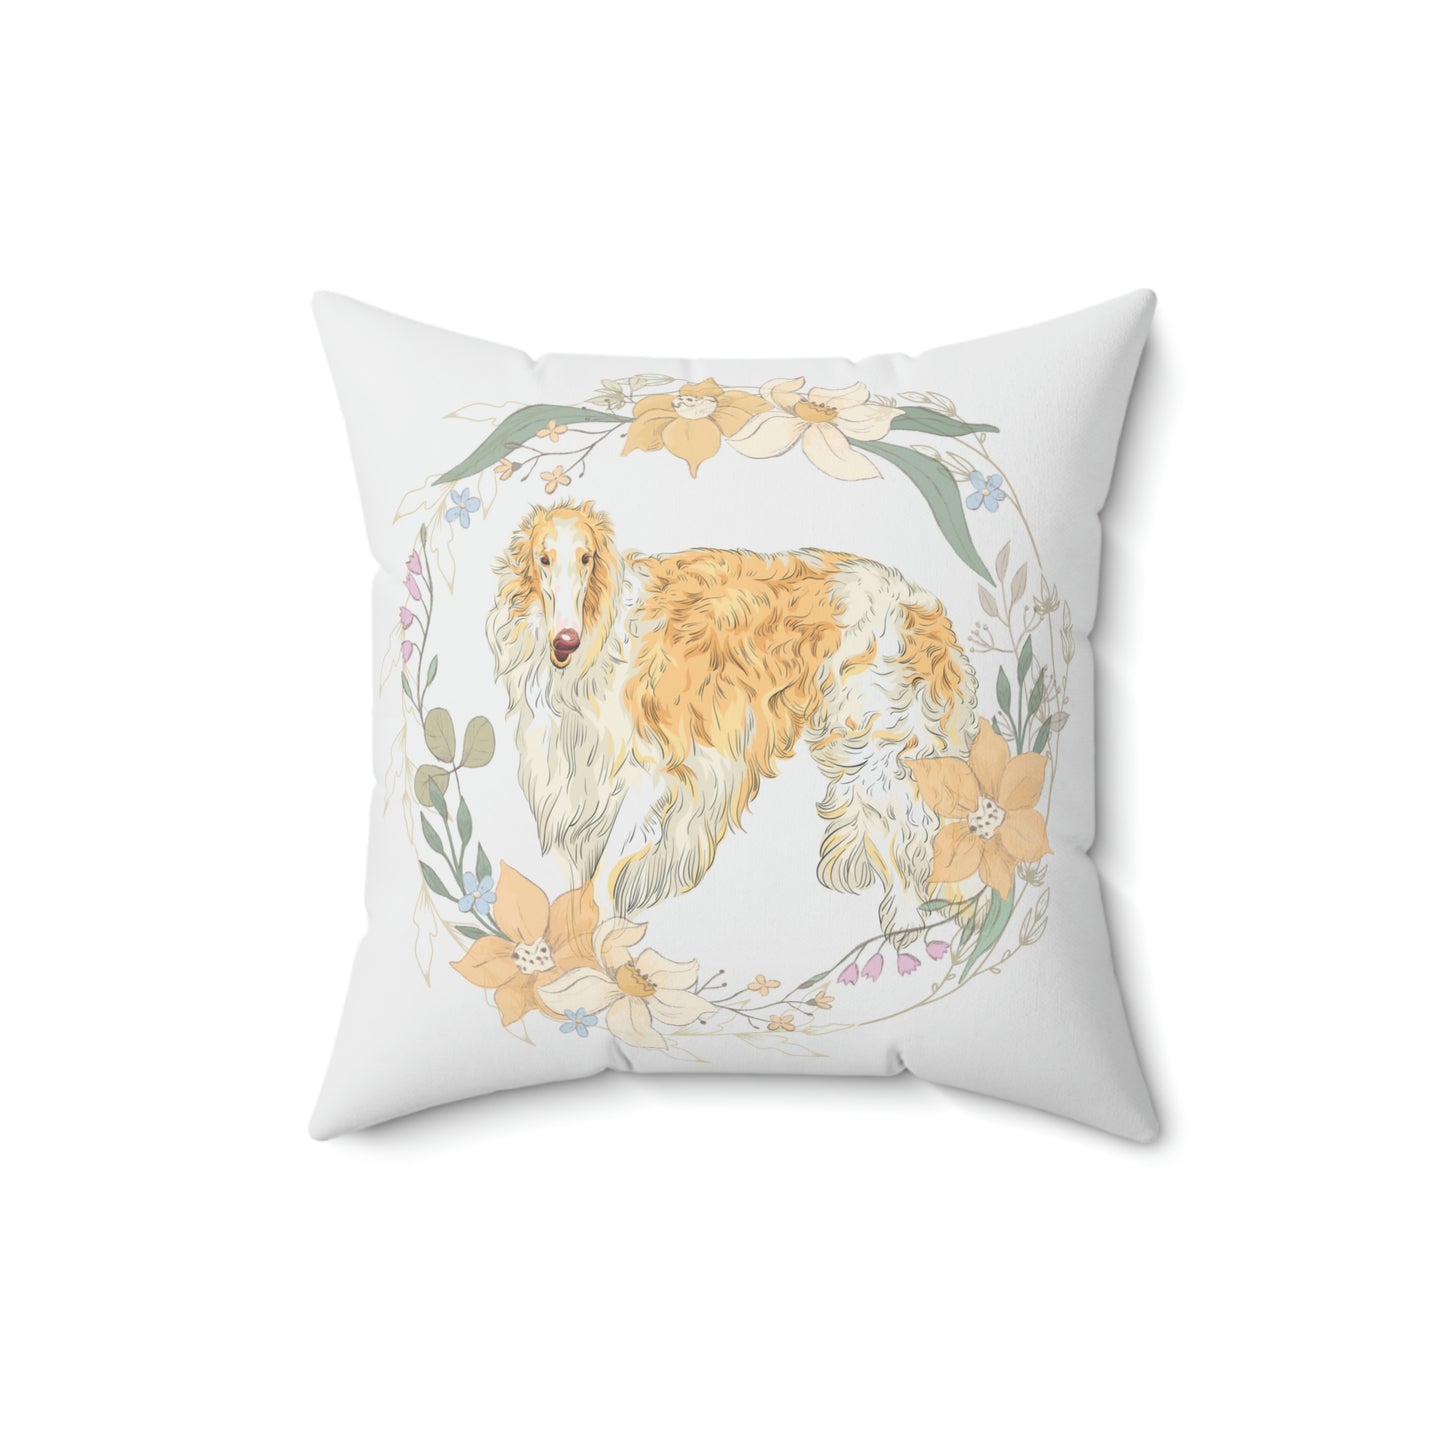 Borzoi Dog with Floral Wreath design Spun Polyester Square Indoor Pillow